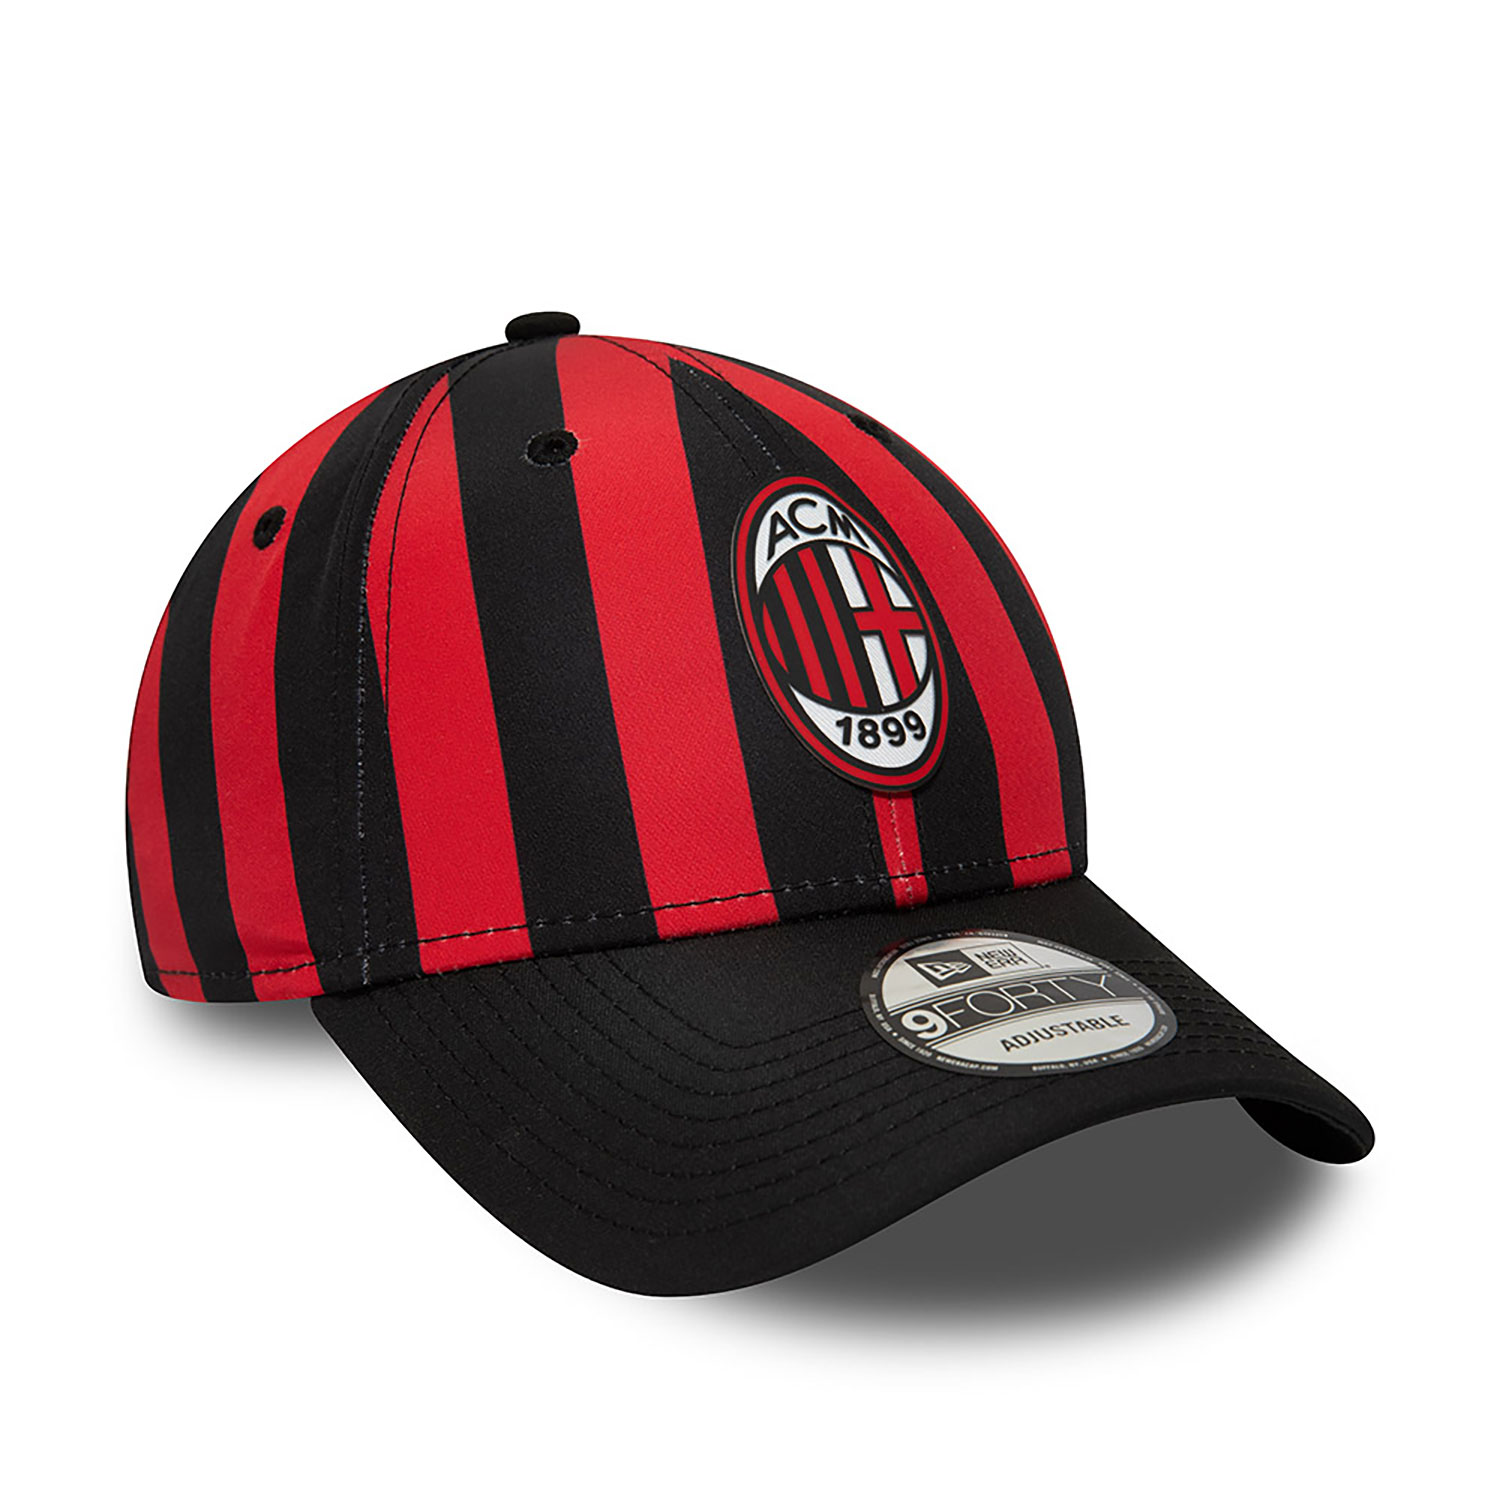 9FORTY New Era x AC Milan Red and Black Cap With Logo